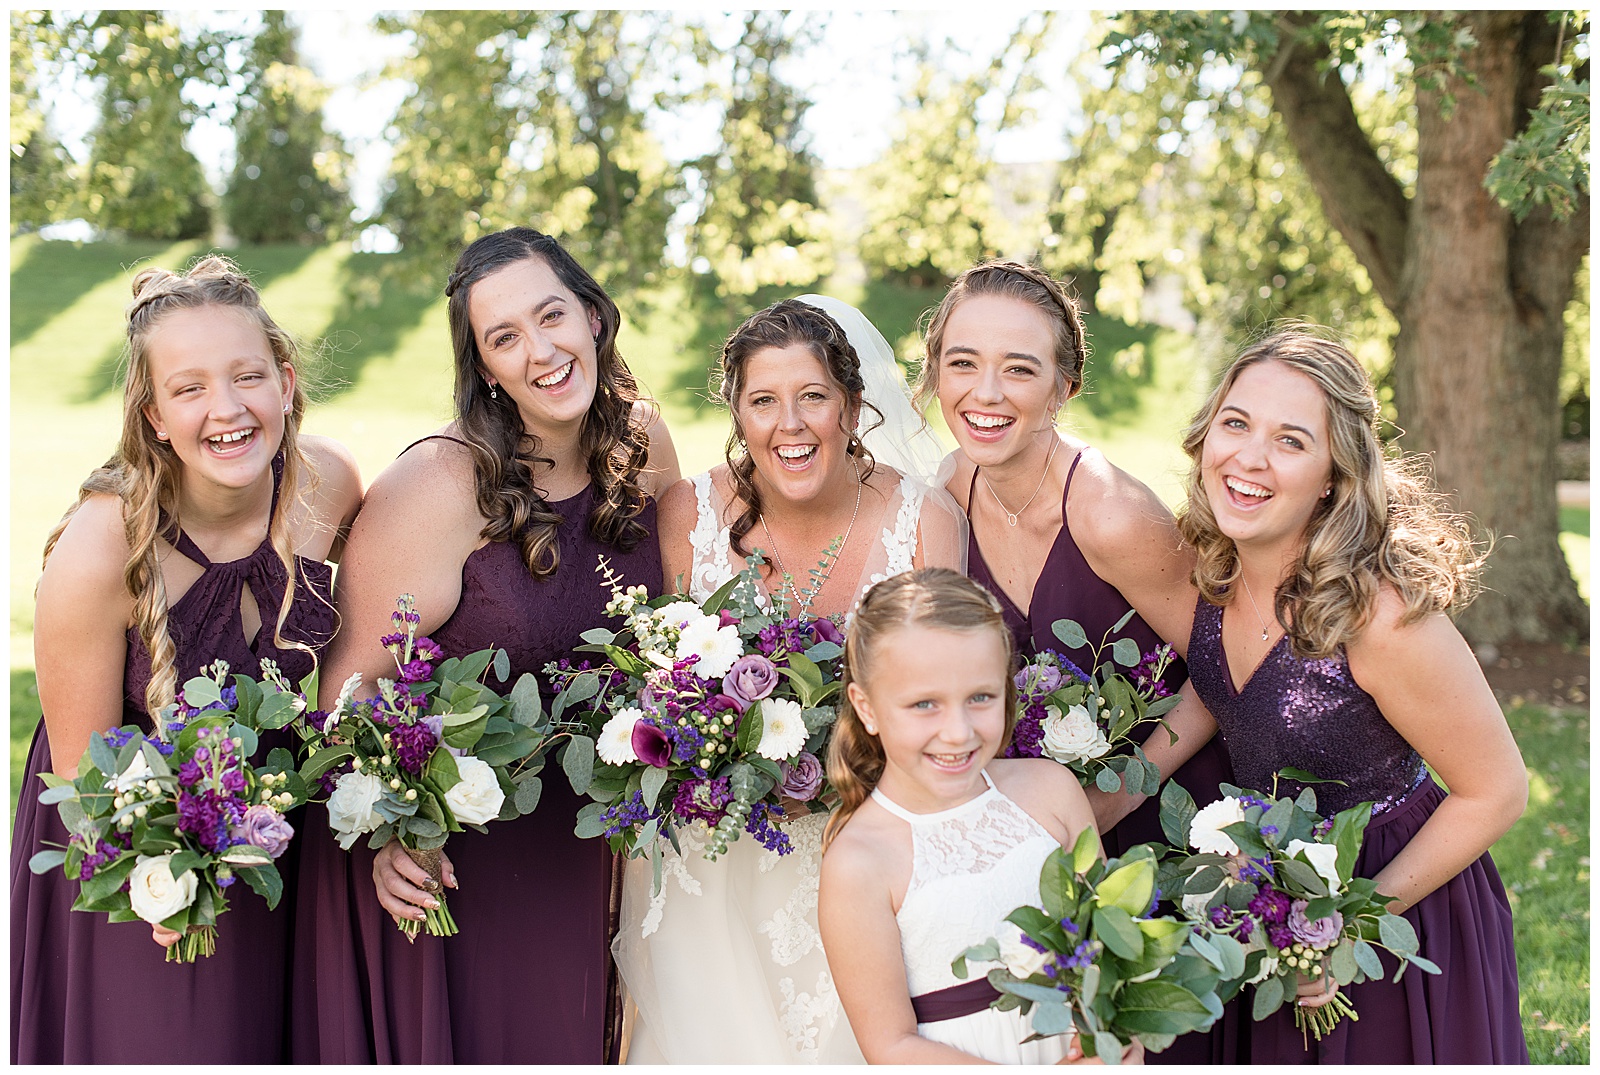 bride surrounded by bridesmaids and flower girl all huddling together with bouquets and leaning in smiling joyfully